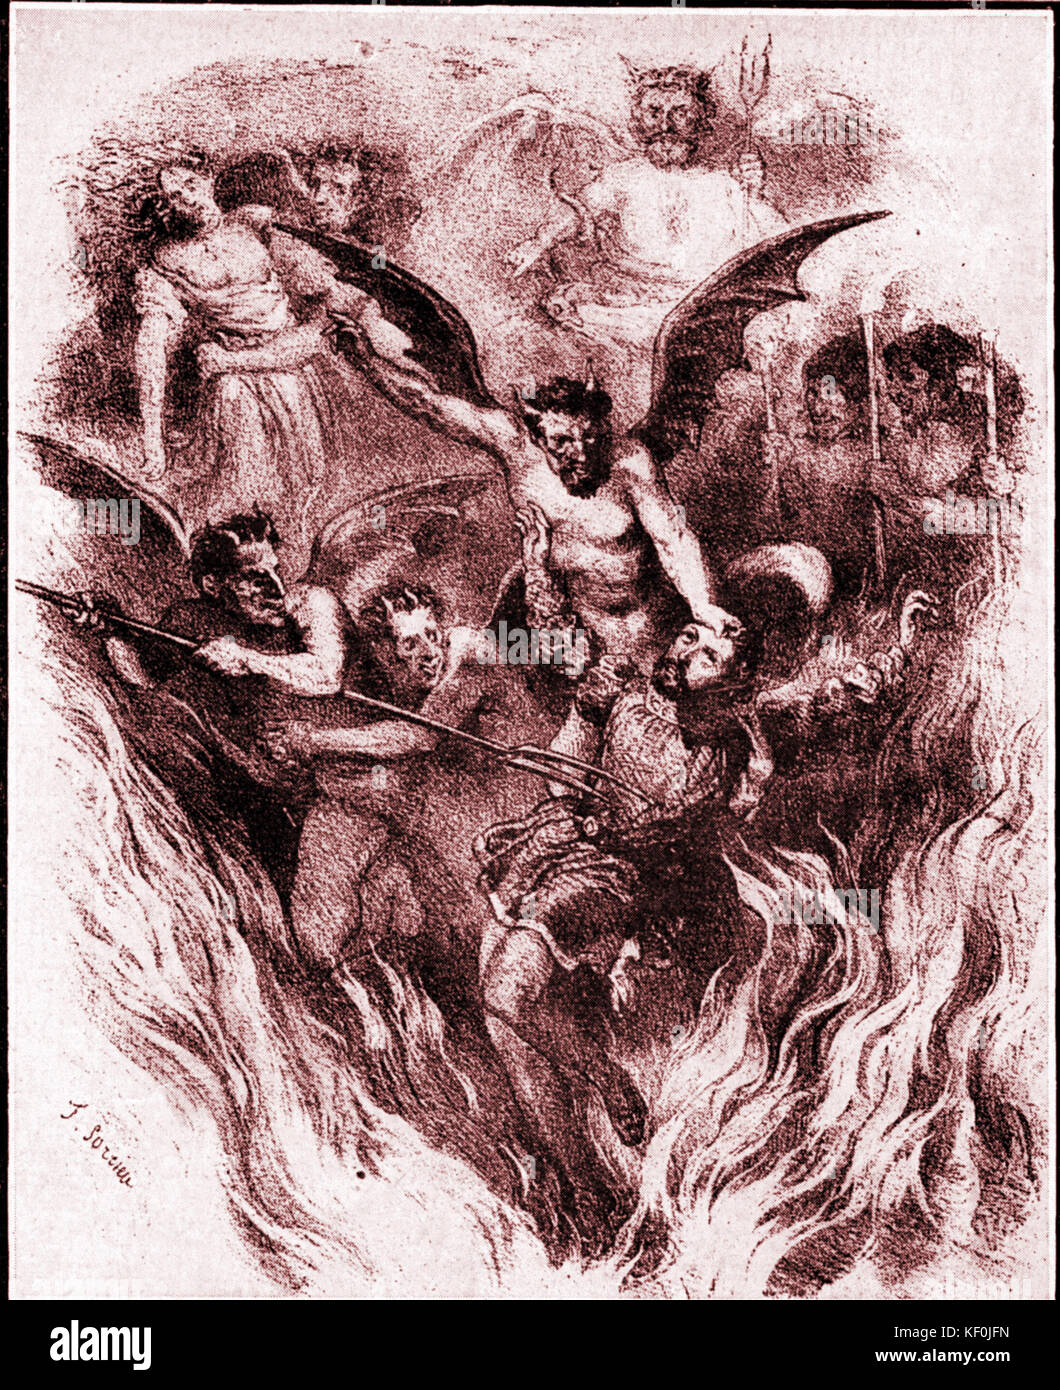 Hector Berlioz's 'The Damnation Faust', Orchestra score cover byFrederic Sorrieu (1854). French composer, 1803-1869. Stock Photo